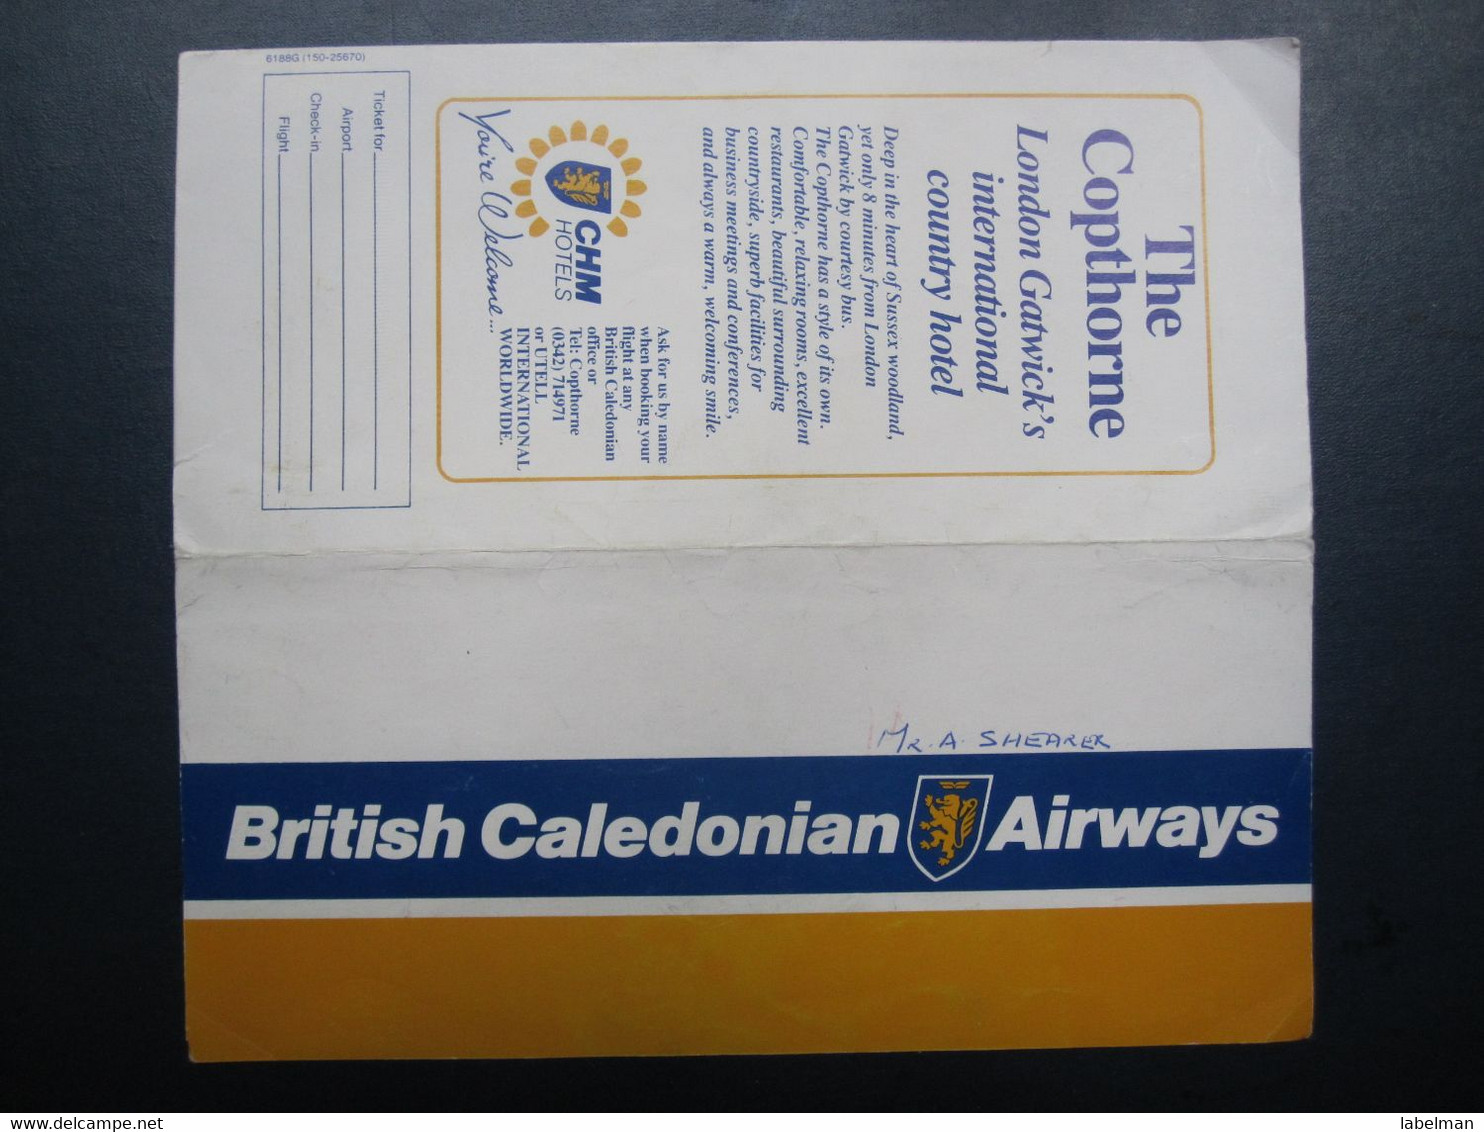 BRITISH CALEDONIAN UK AVIATION AIRWAYS AIRLINE TICKET HOLDER BOOKLET VIP TAG LUGGAGE BAGGAGE PLANE AIRCRAFT AIRPORT - Mundo